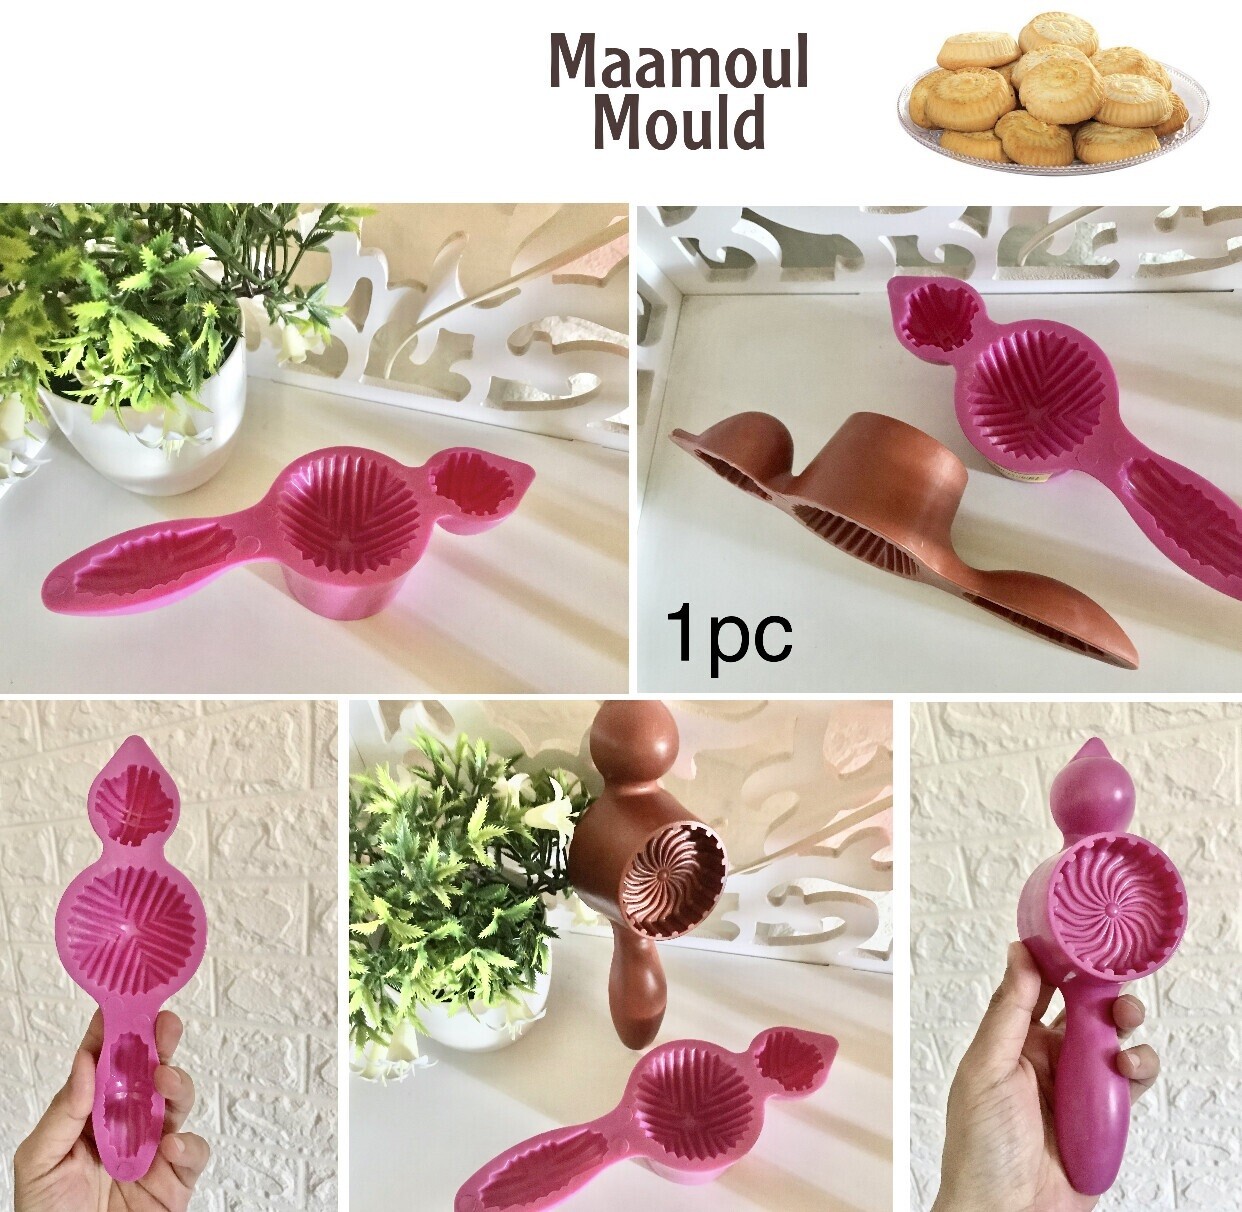 Maamoul Mould